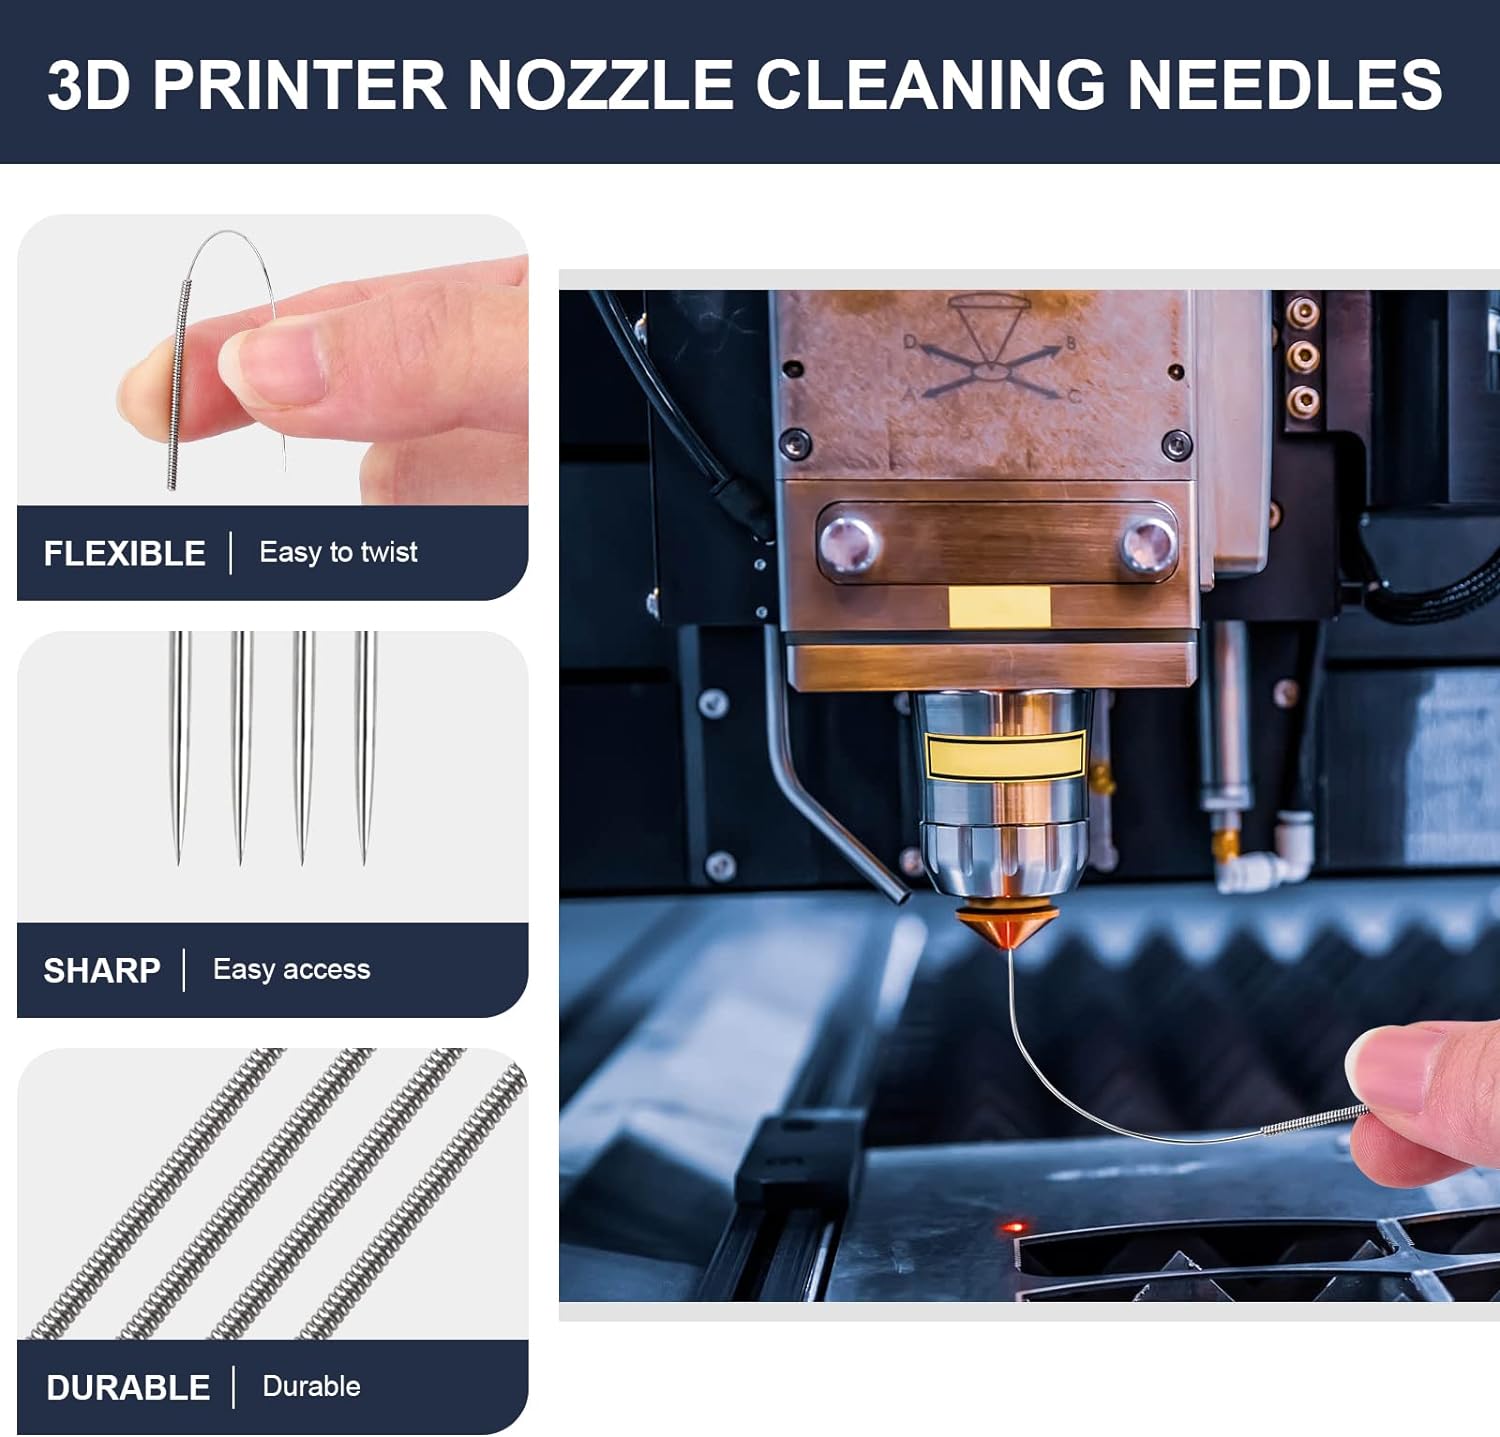 complete-26-piece-3d-printer-nozzle-wrench-maintenance-kit-includes-20-cleaning-pins-with-storage-box-2-tweezers-2-coppe-2 Complete 26-Piece 3D Printer Nozzle Wrench Maintenance Kit Review